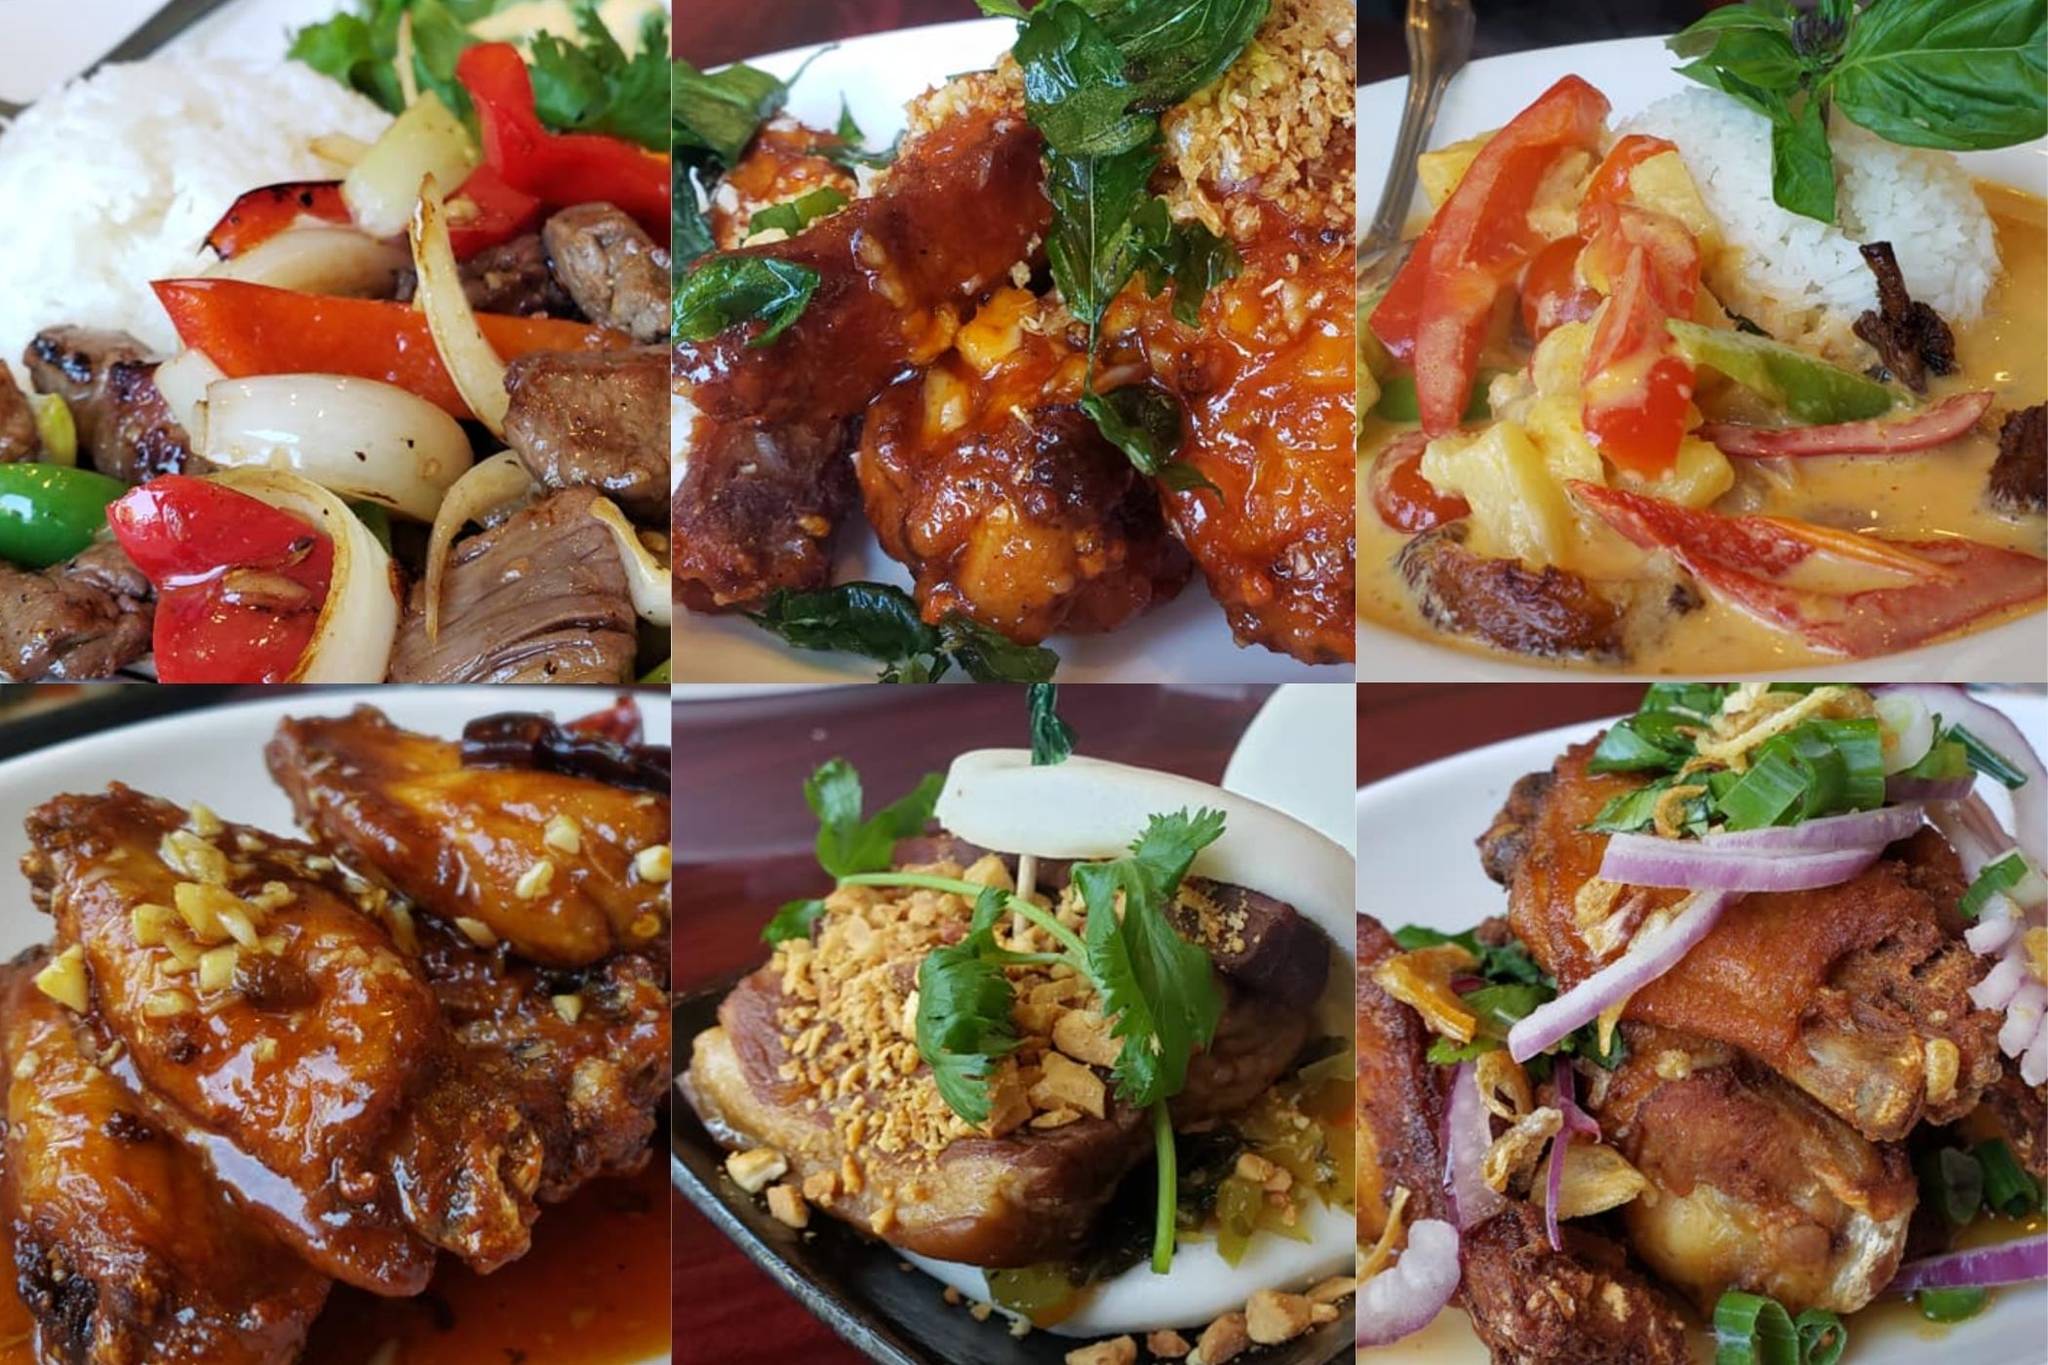 Images of dishes from Issaquah’s Umi Cafe posted on the SMORS page. (Photo courtesy of Kristen Ho)